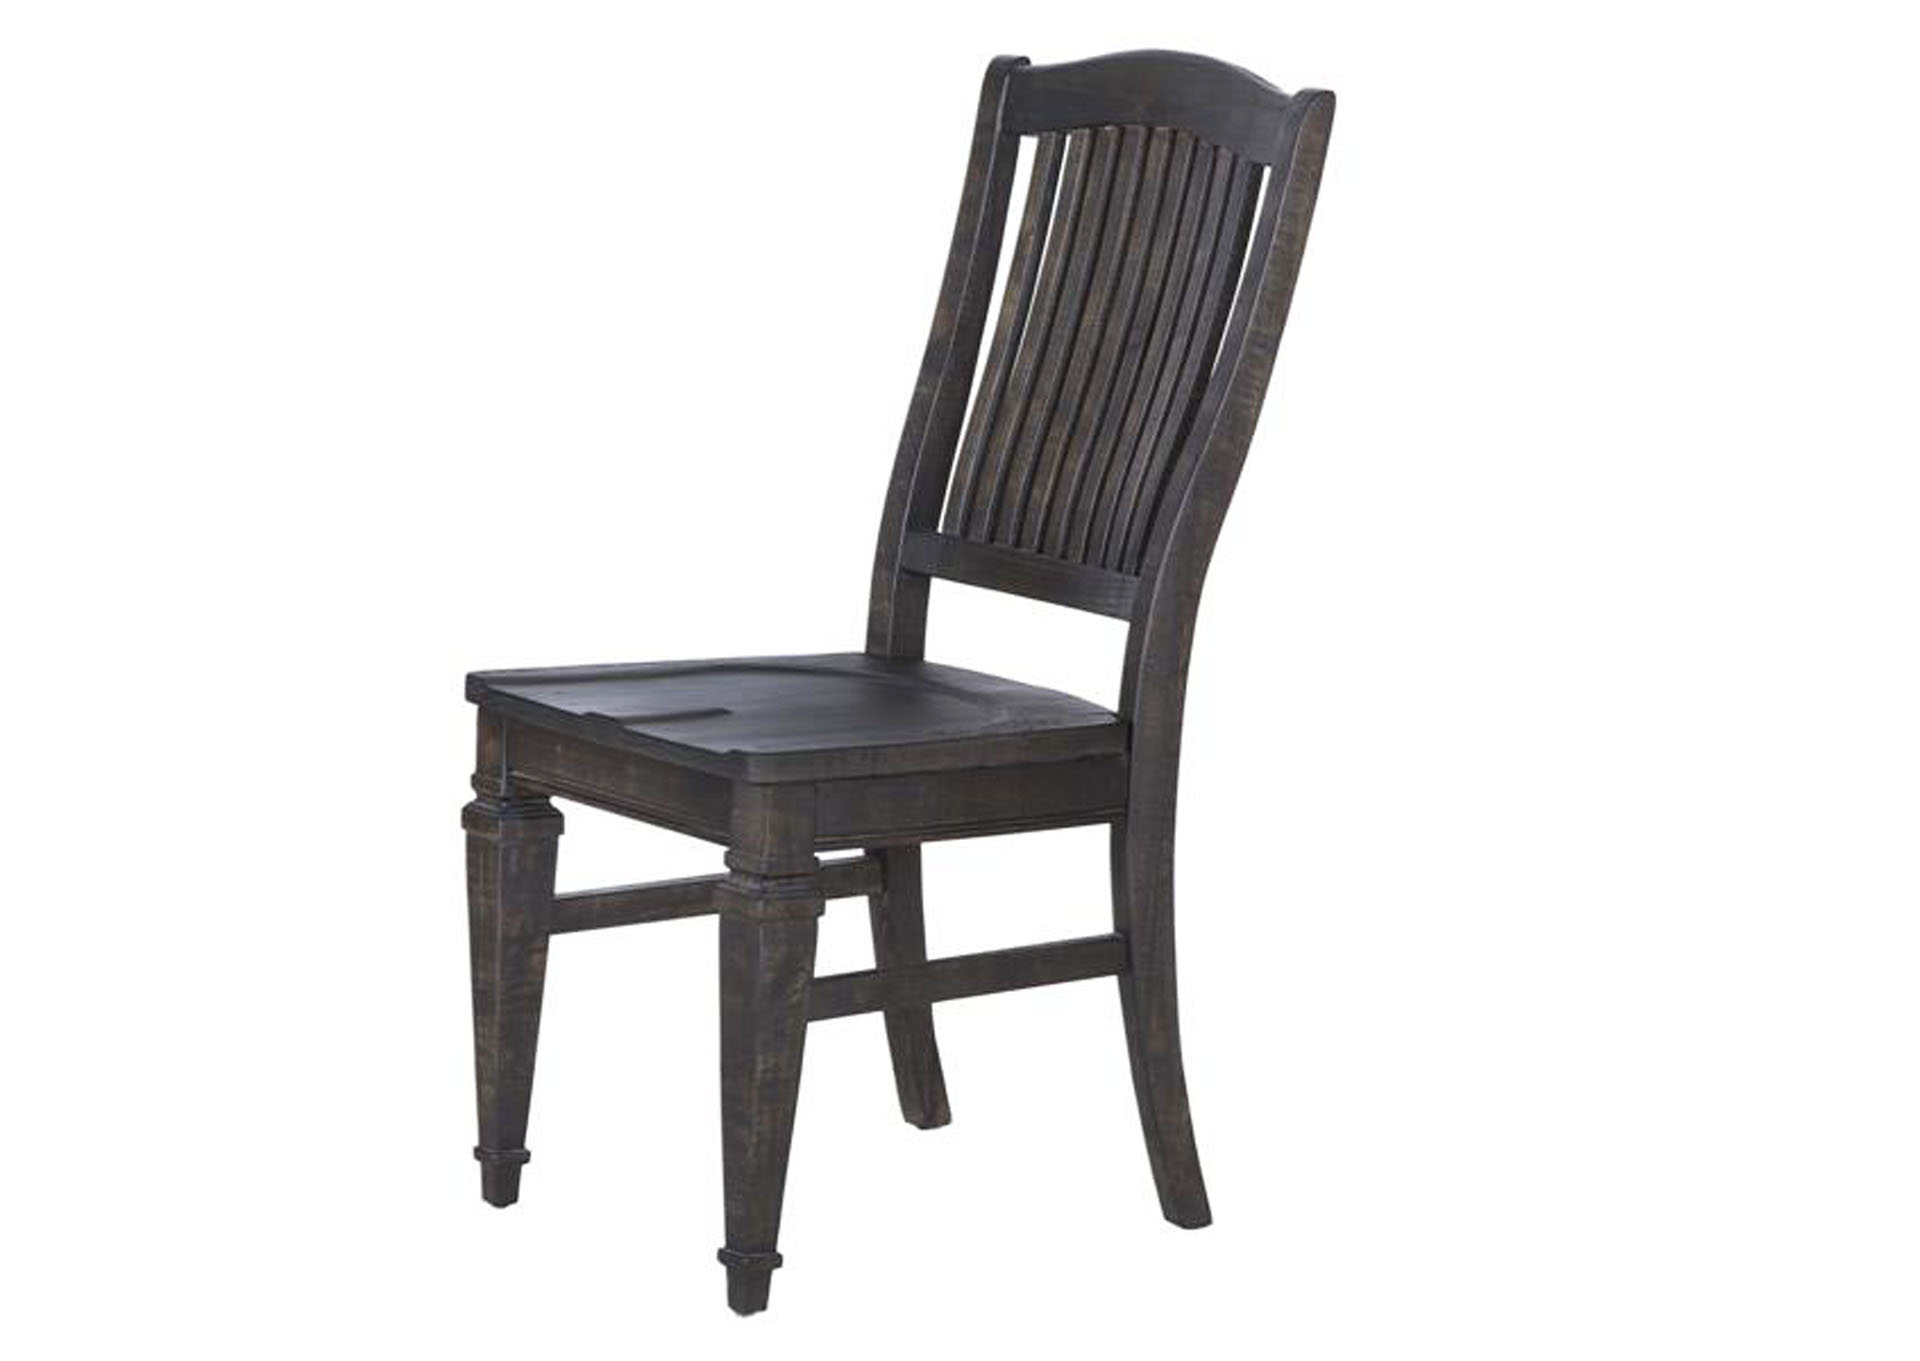 Calistoga Weathered Charcoal Desk Chair,Magnussen